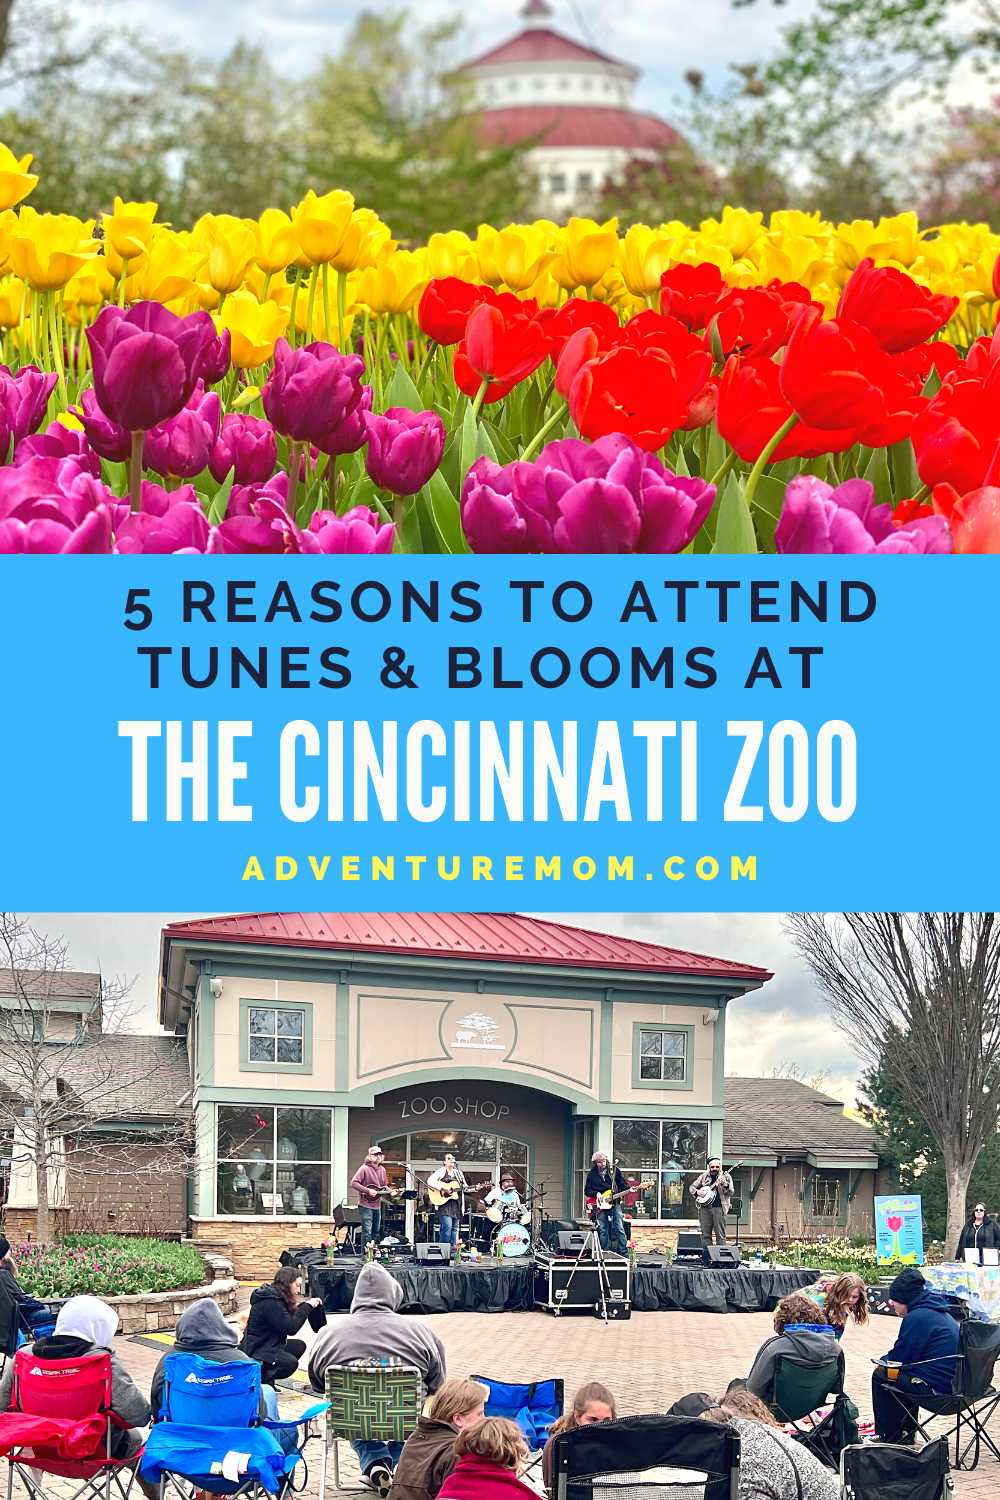 5 Reasons to Attend Tunes & Blooms at the Cincinnati Zoo